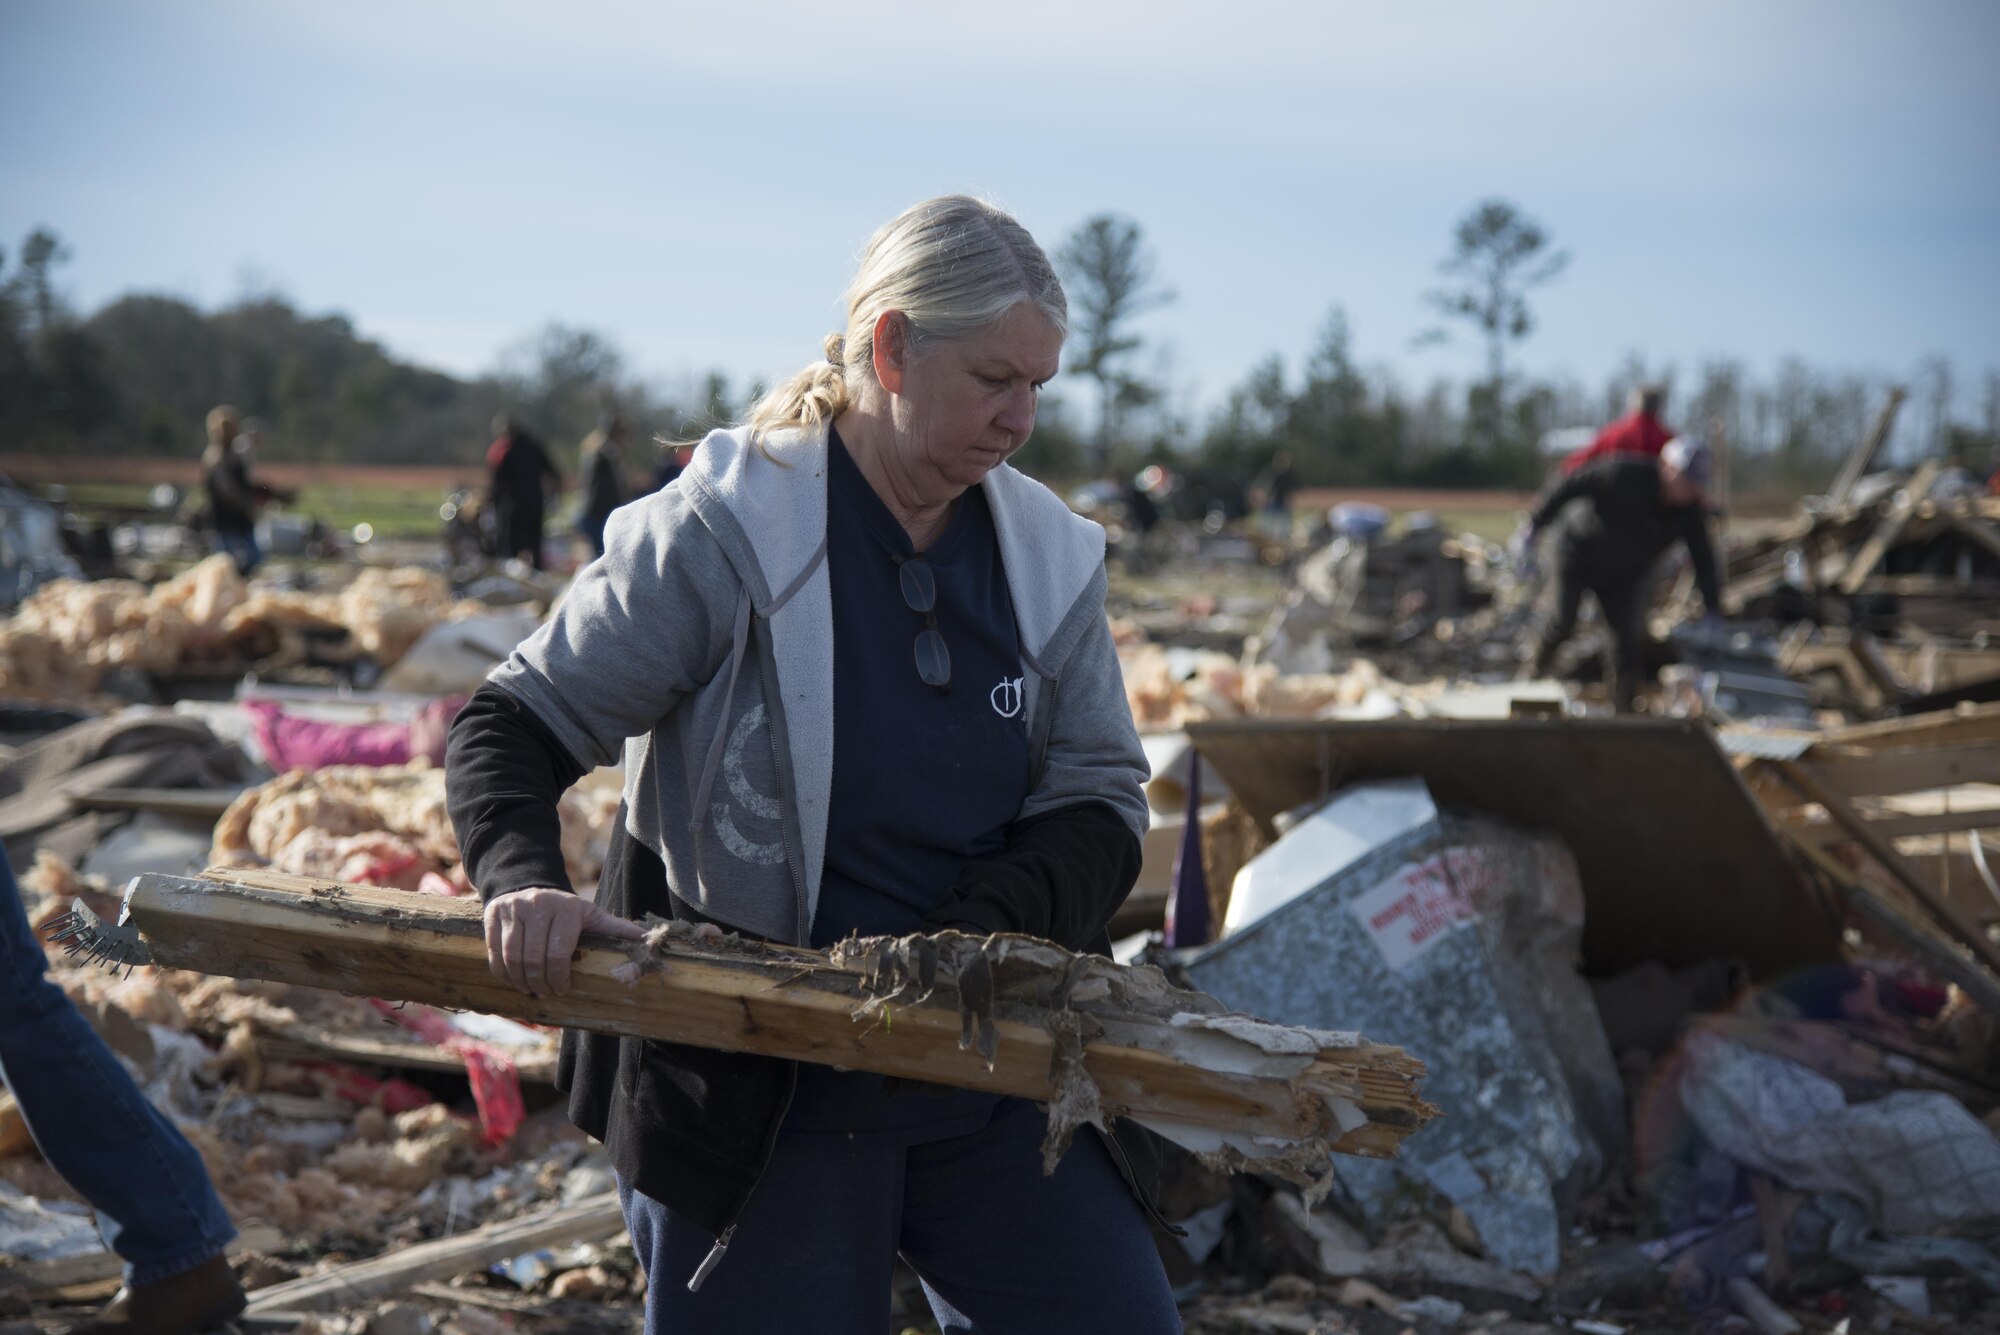 A volunteer carries salvageable wood to a pile, Jan. 28, 2017, in Adel, Ga. The wood was salvaged to later rebuild the neighborhood that was destroyed by the same tornado that killed 15 people and was later deemed an EF3, the strongest tornado to touch down in the county’s history. (U.S. Air Force photo by 2d Lt. Kaitlin Toner)